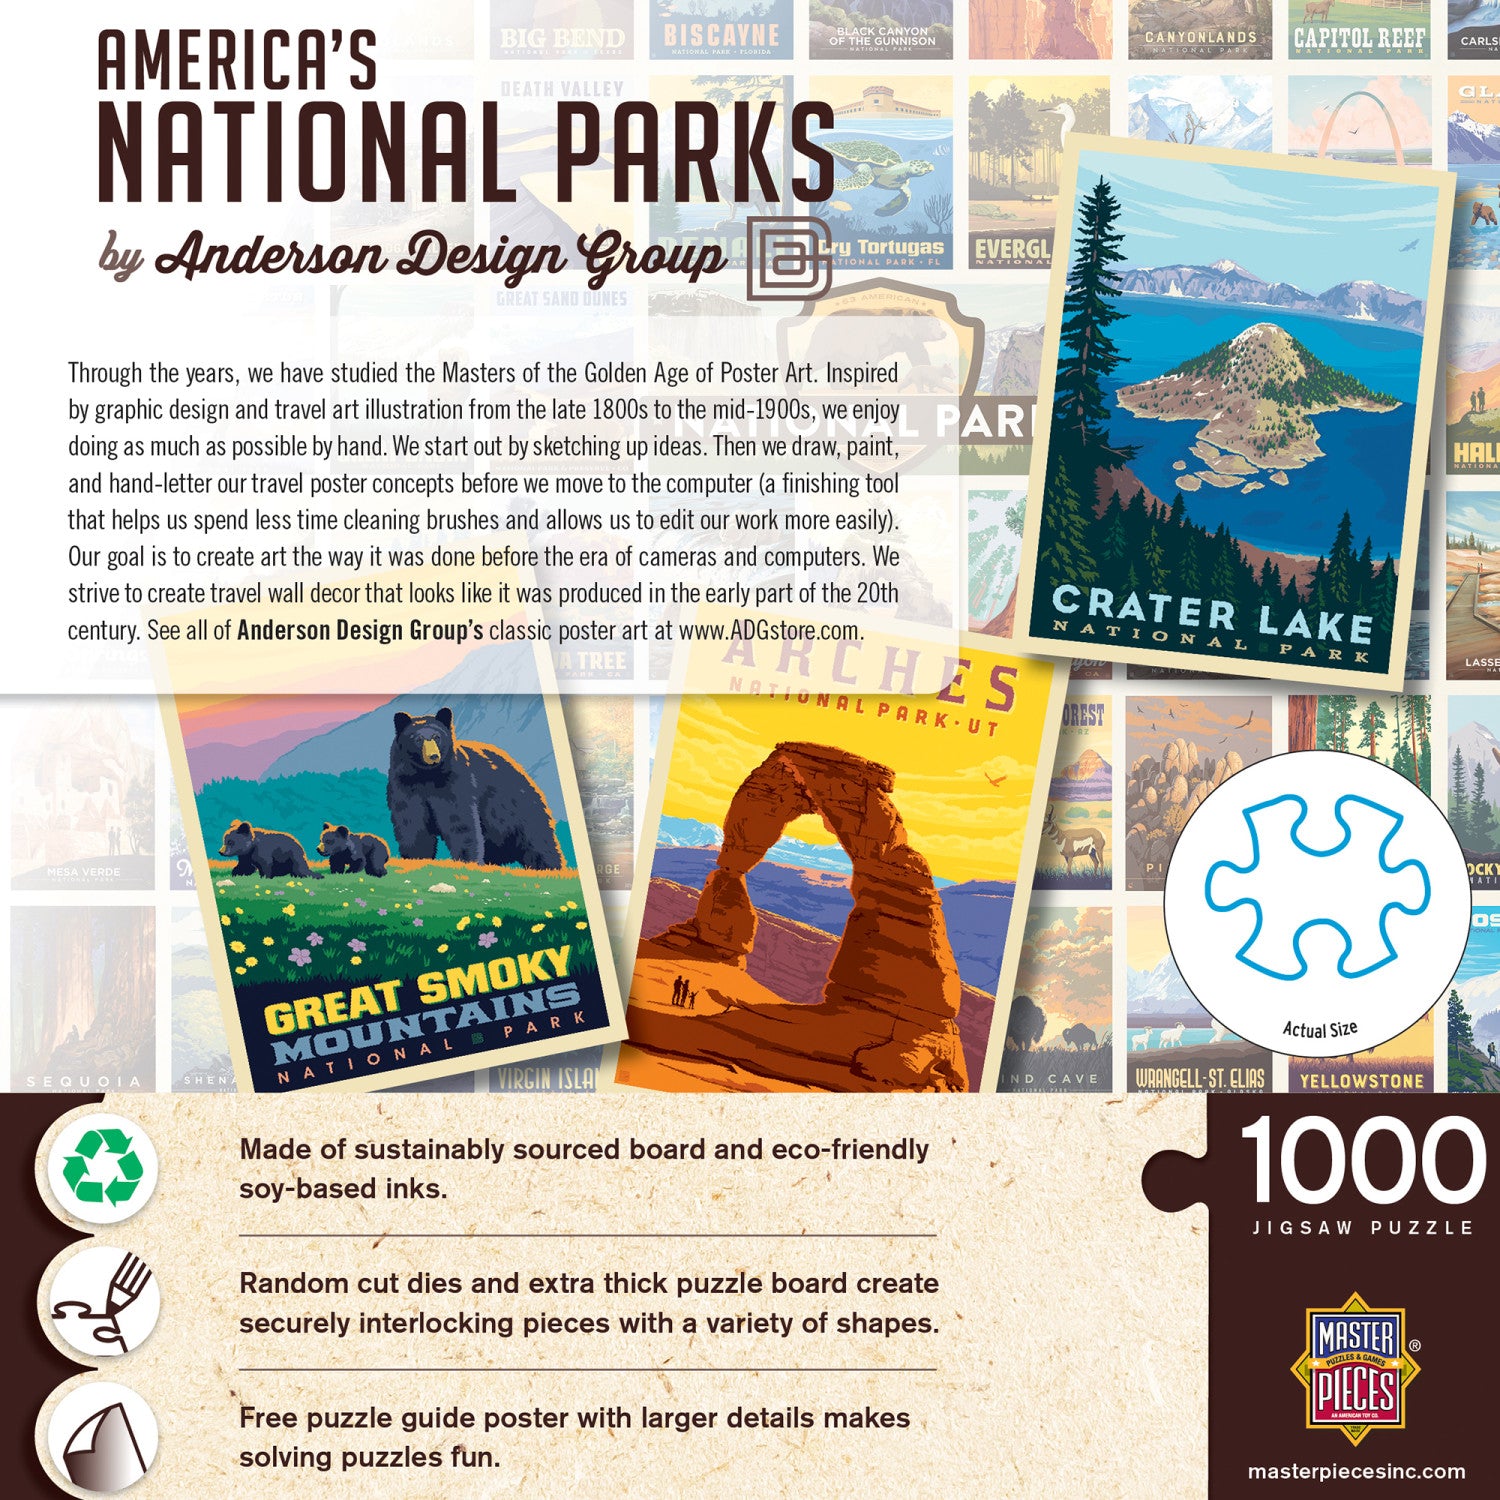 National Parks - Vintage Collage Poster Art 1000 Piece Jigsaw Puzzle